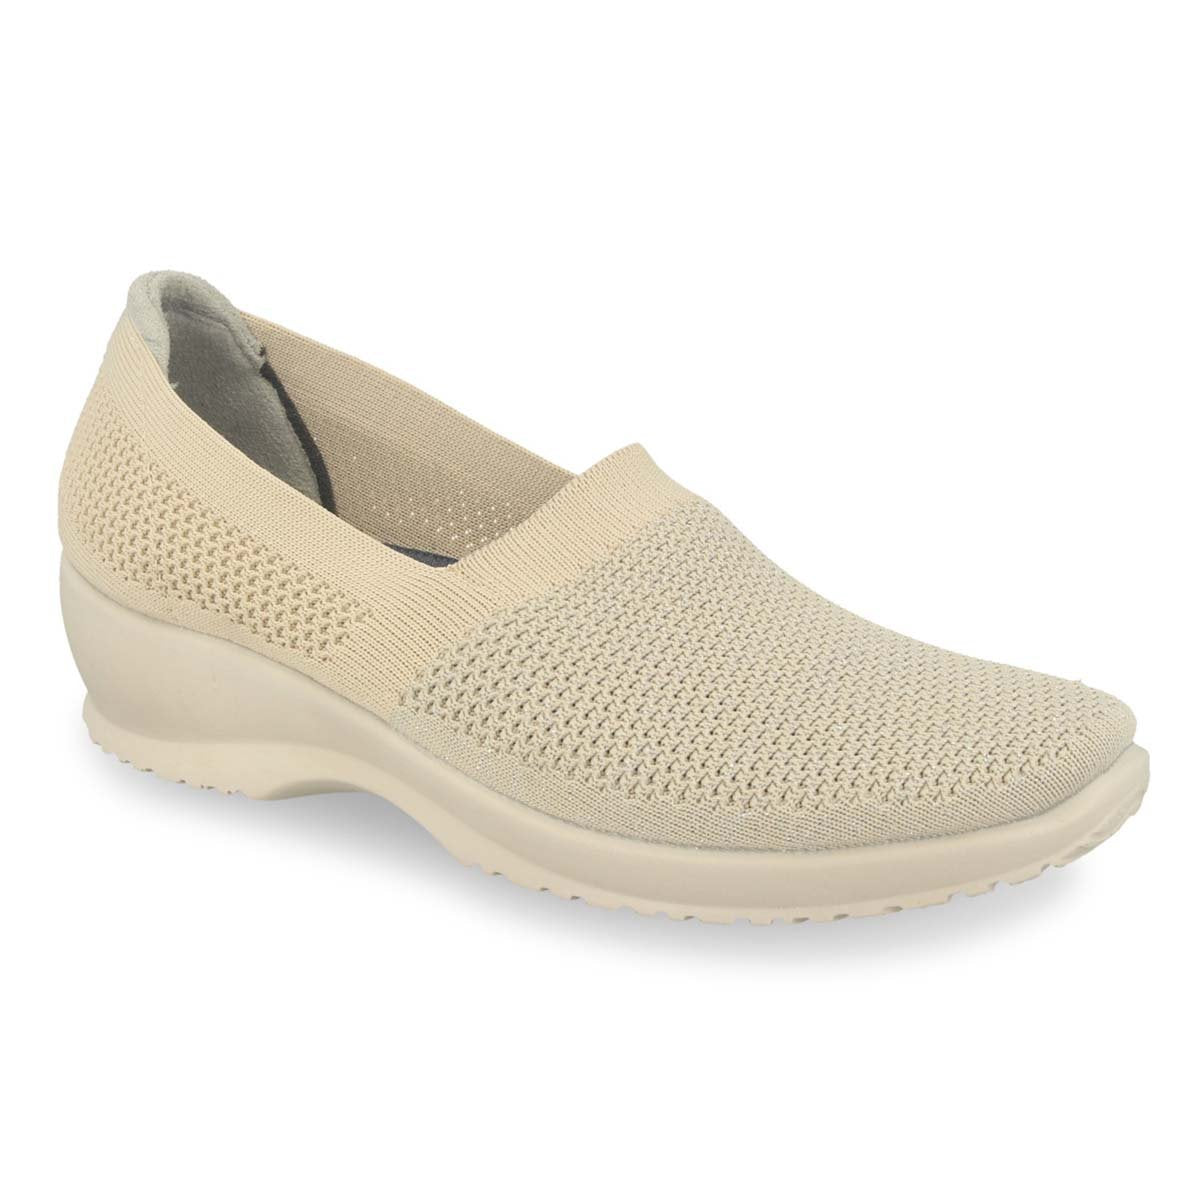 See the Stretch Mesh Slip-On Women Shoes in the colour BEIGE, available in various sizes